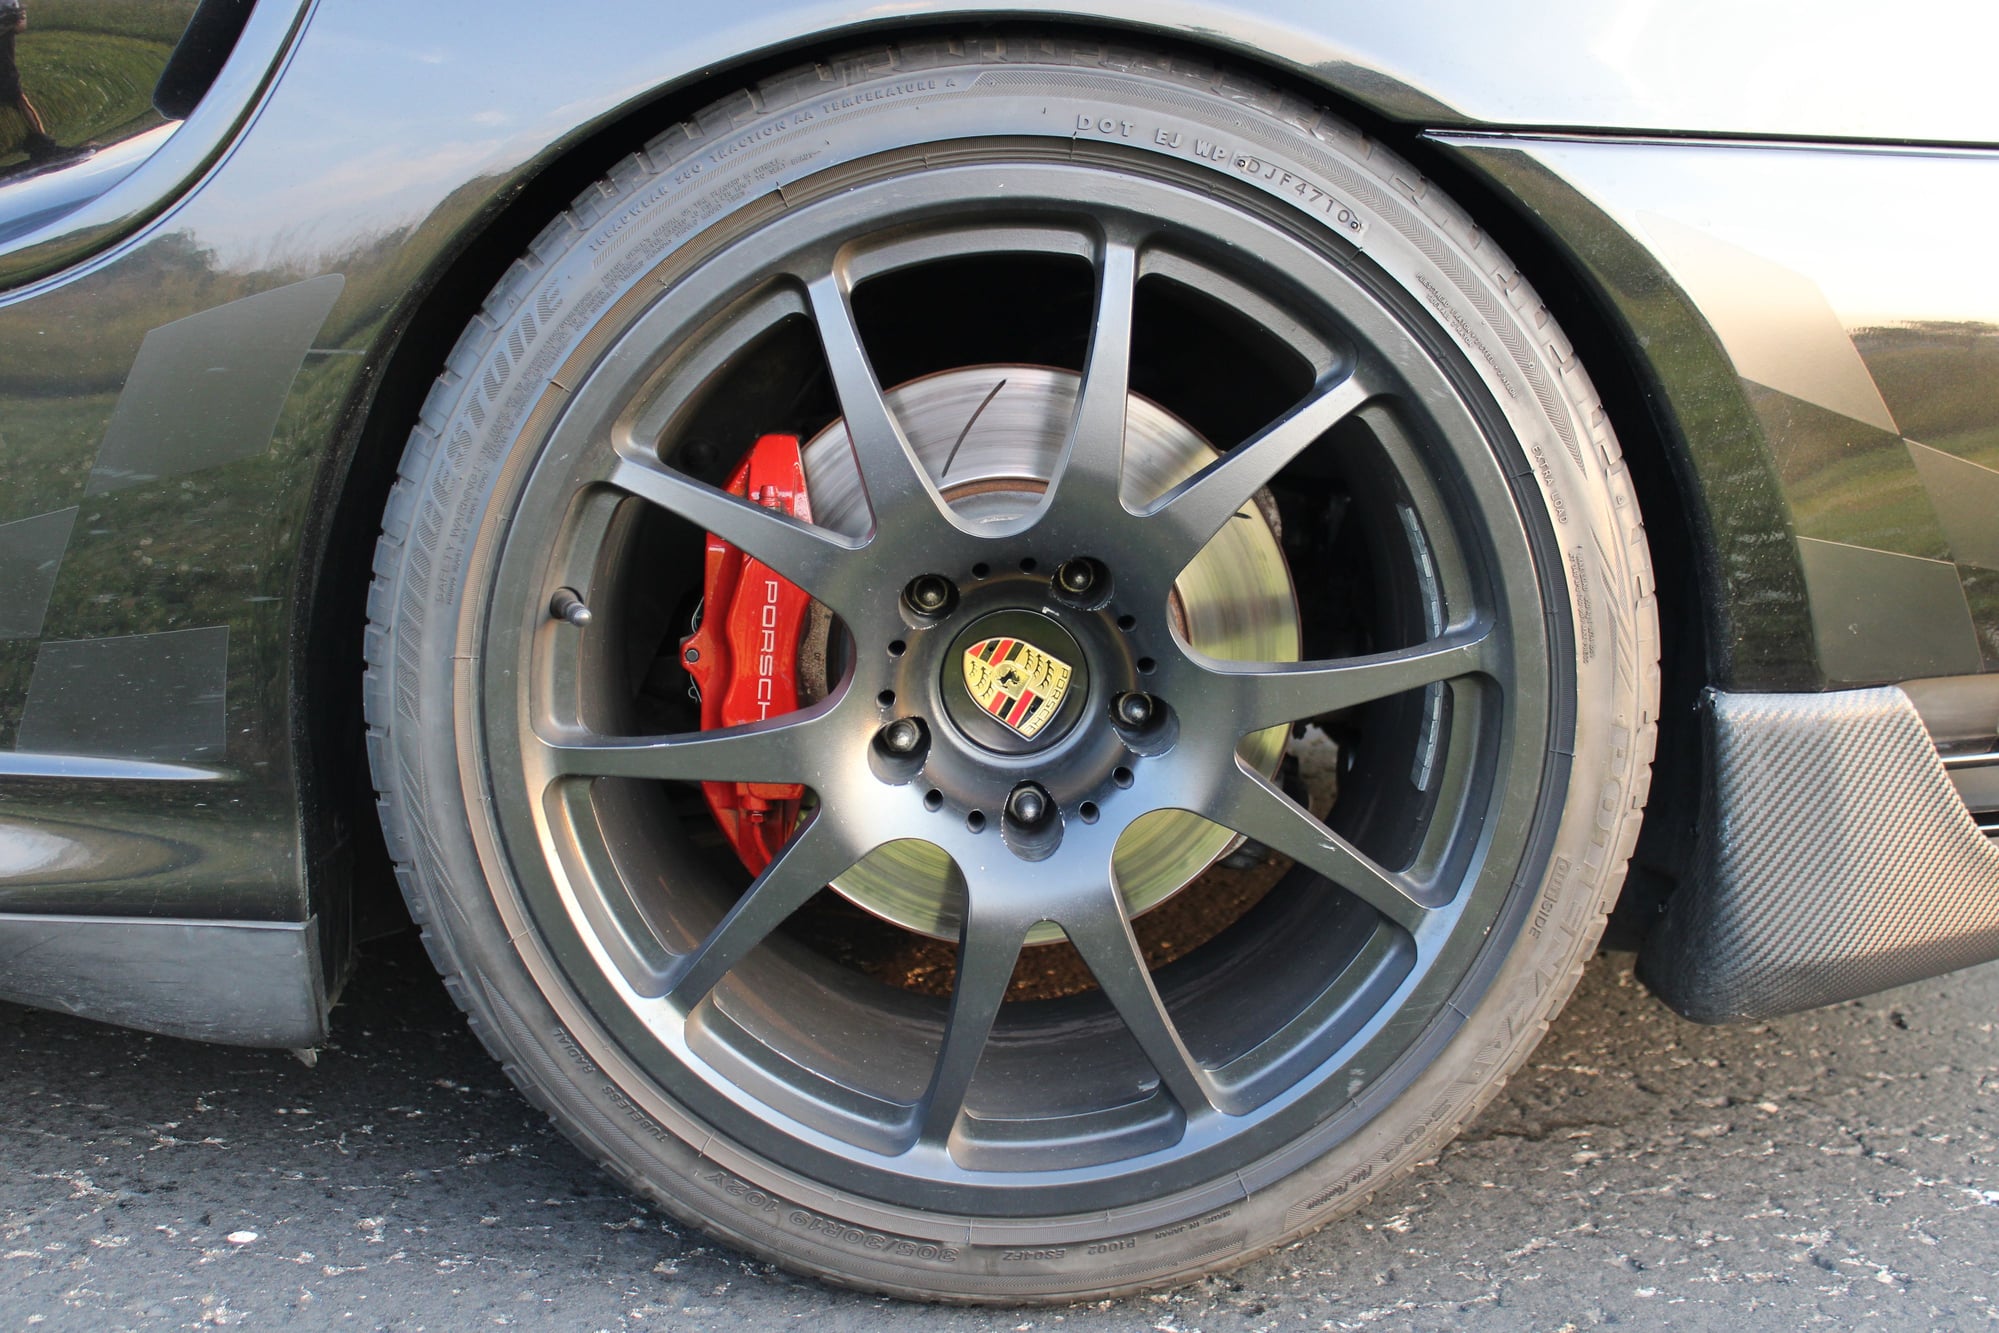 Wheels and Tires/Axles - DFW - Champion Motorsport RS171 Forged Monolite Wheels, mounted with used Potenza S04 - Used - Dallas, TX 75229, United States